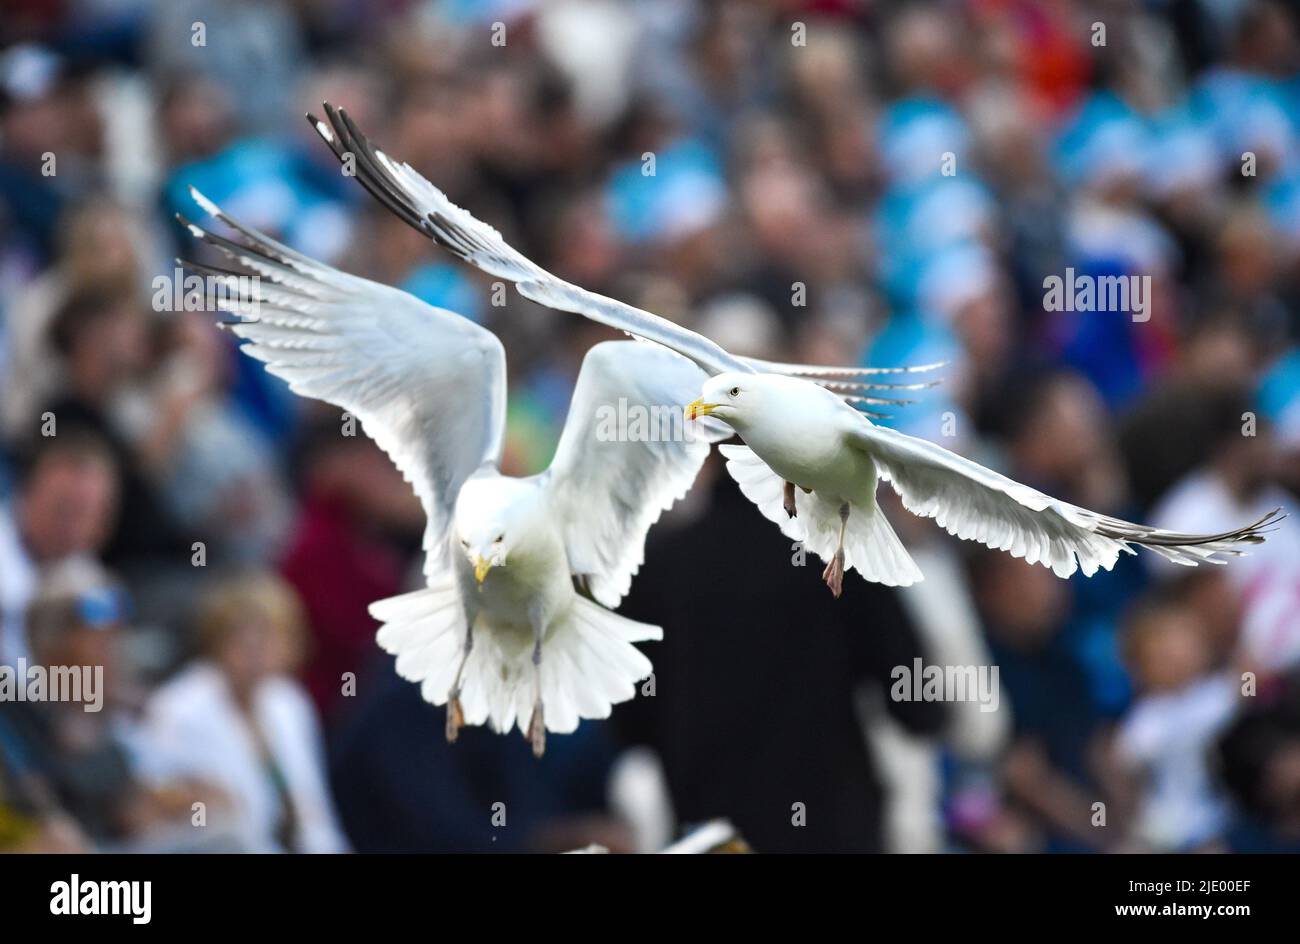 Hove UK 23rd June 2022 -  Seagulls enjoy getting in a flap during the T20 Vitality Blast  match  between Sussex Sharks and Surrey at the 1st Central County Ground Hove . : Credit Simon Dack / Alamy Live News Stock Photo